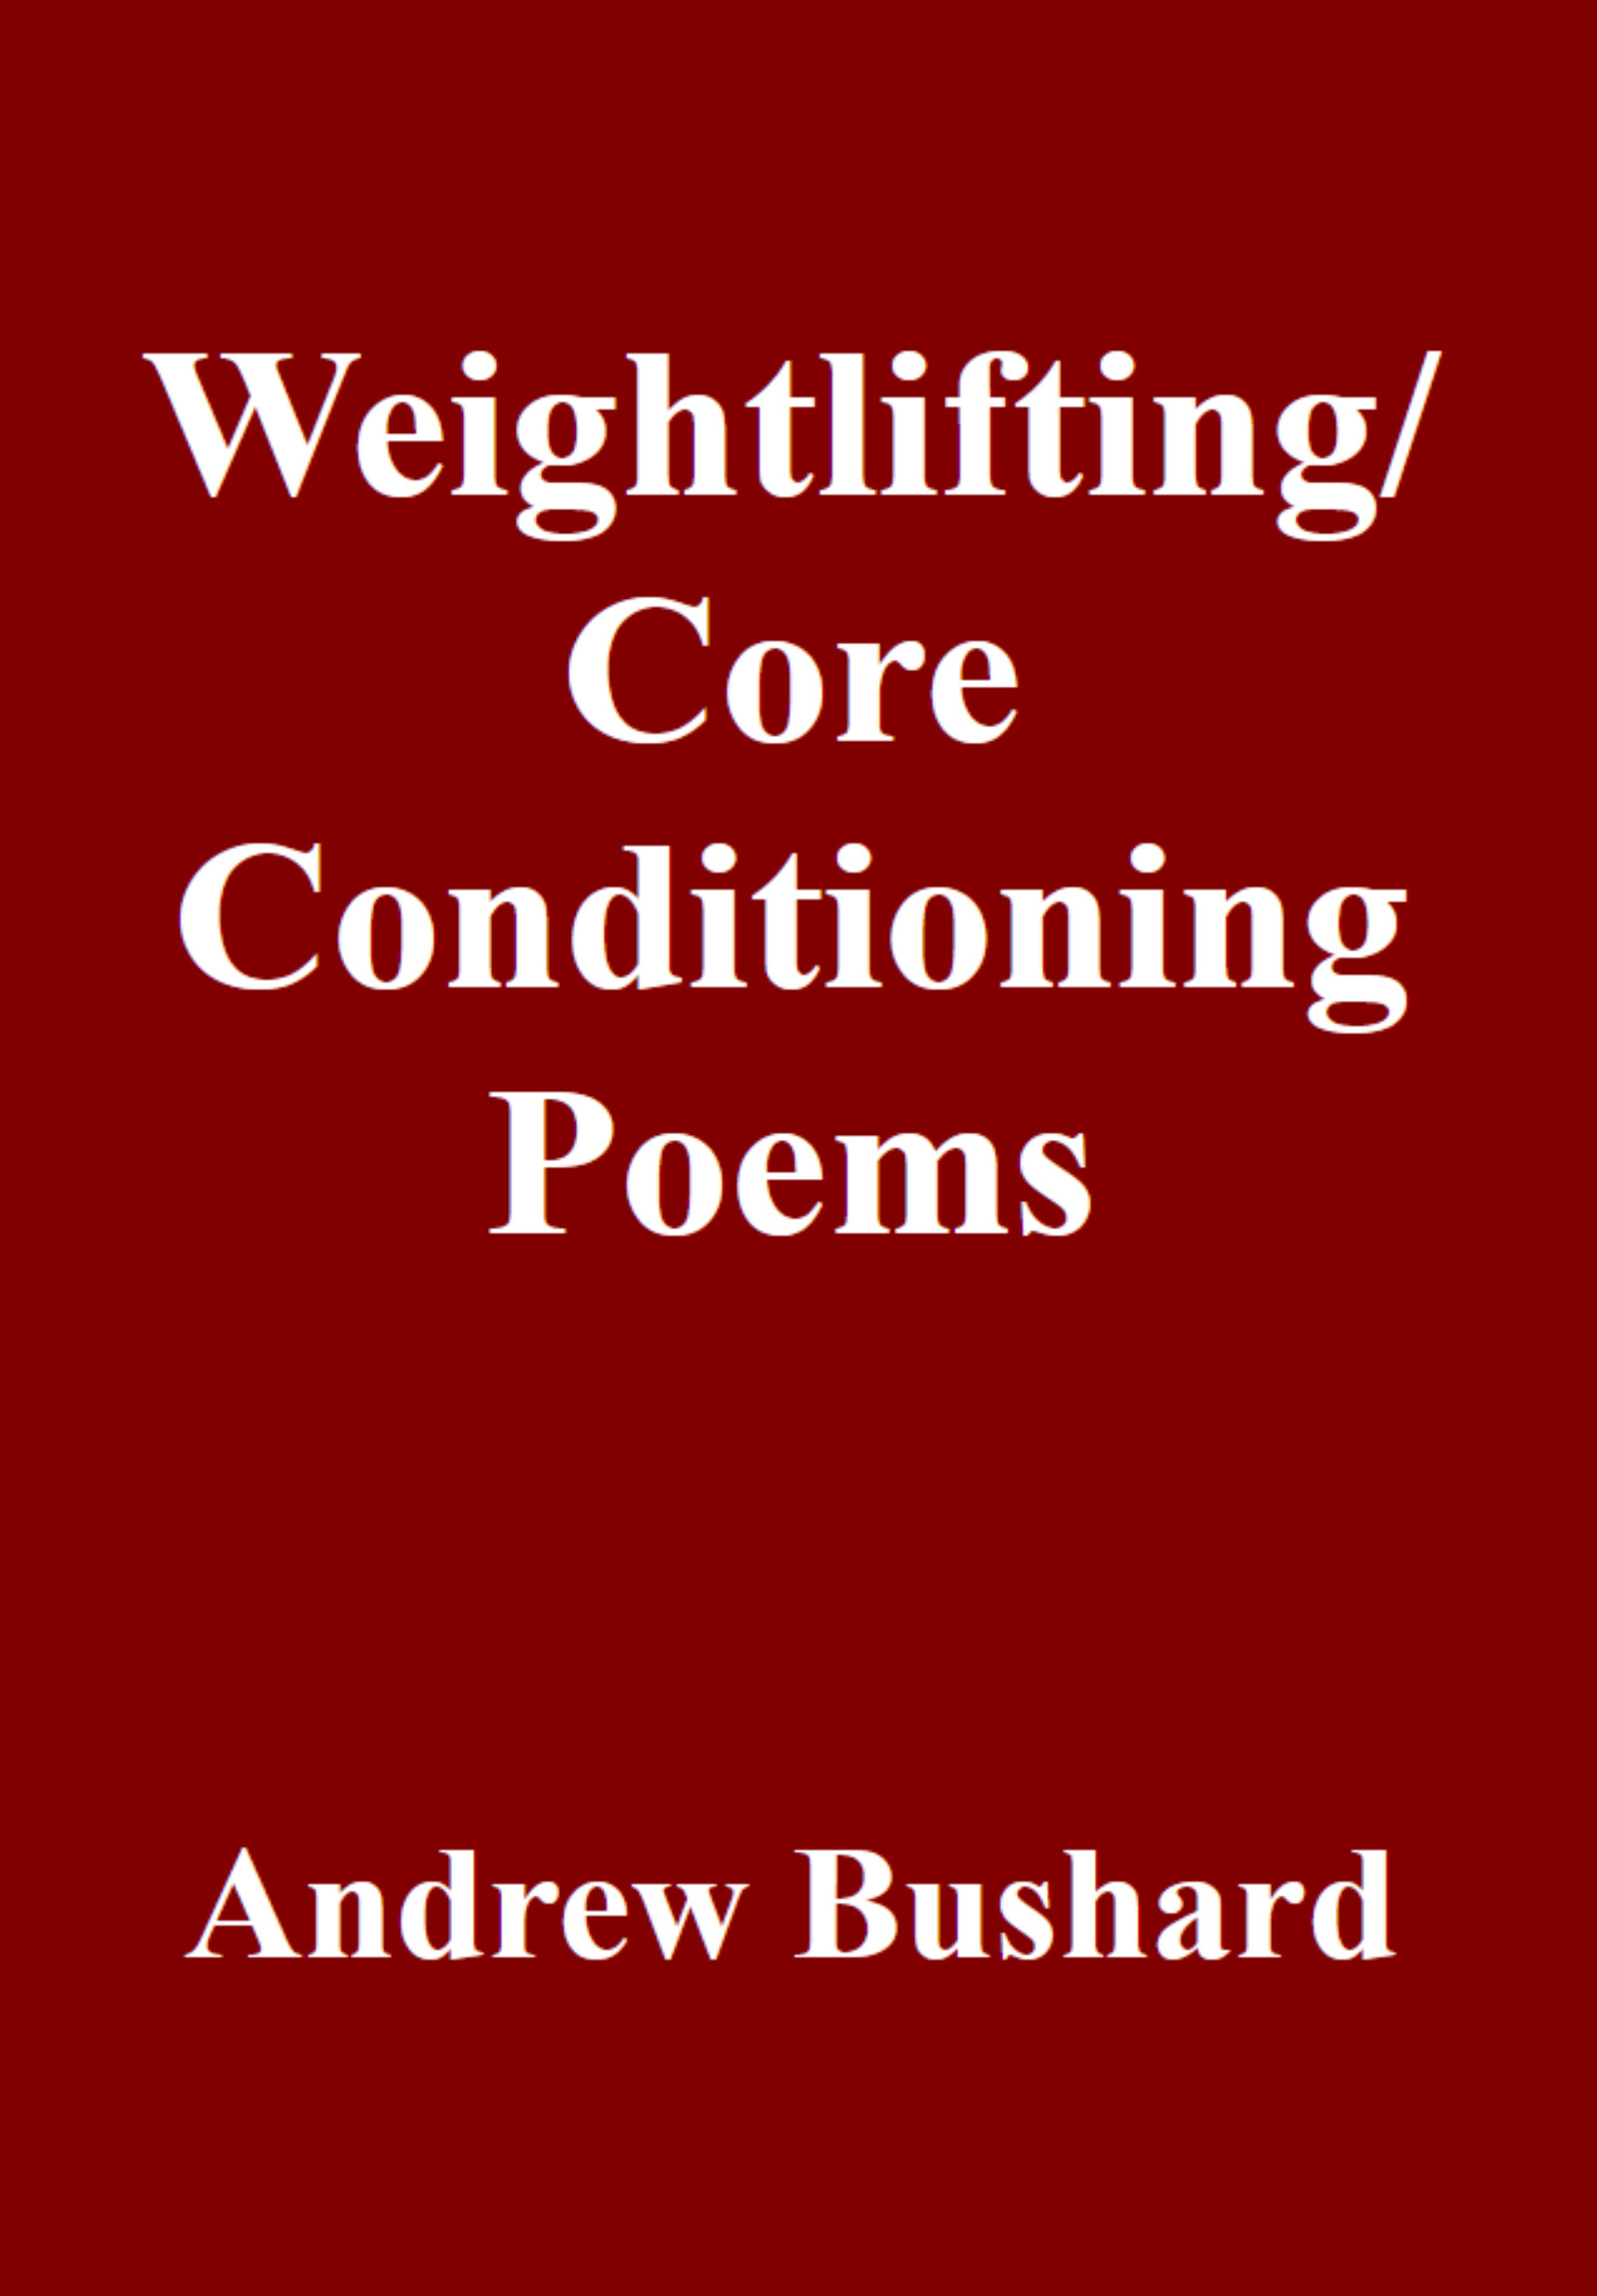 Weightlifting/ Core Conditioning Poems Audiobook